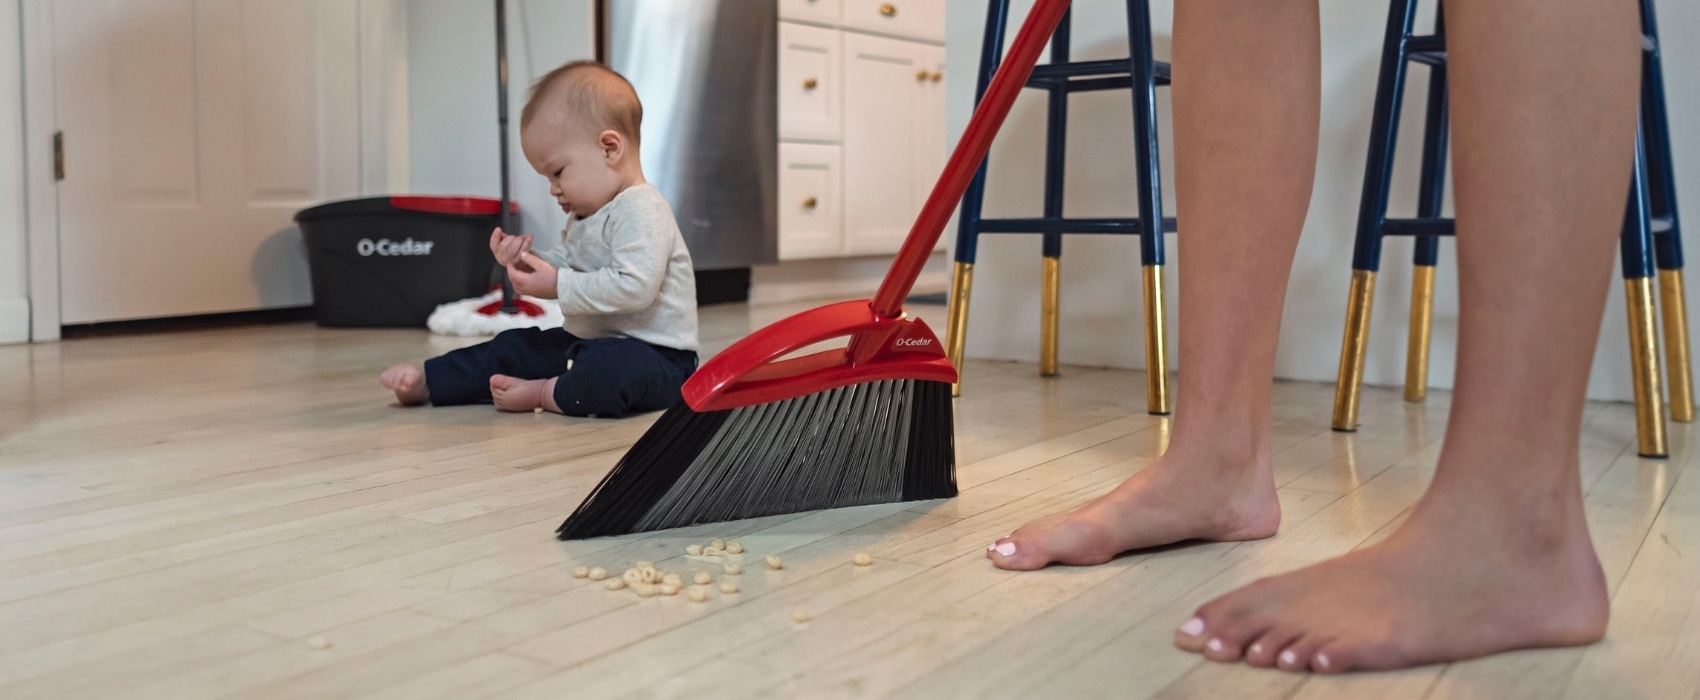 Sweep Before Deep Cleans for Sparkling Clean Floors, Household Cleaning  Products Made for Easy Cleaning